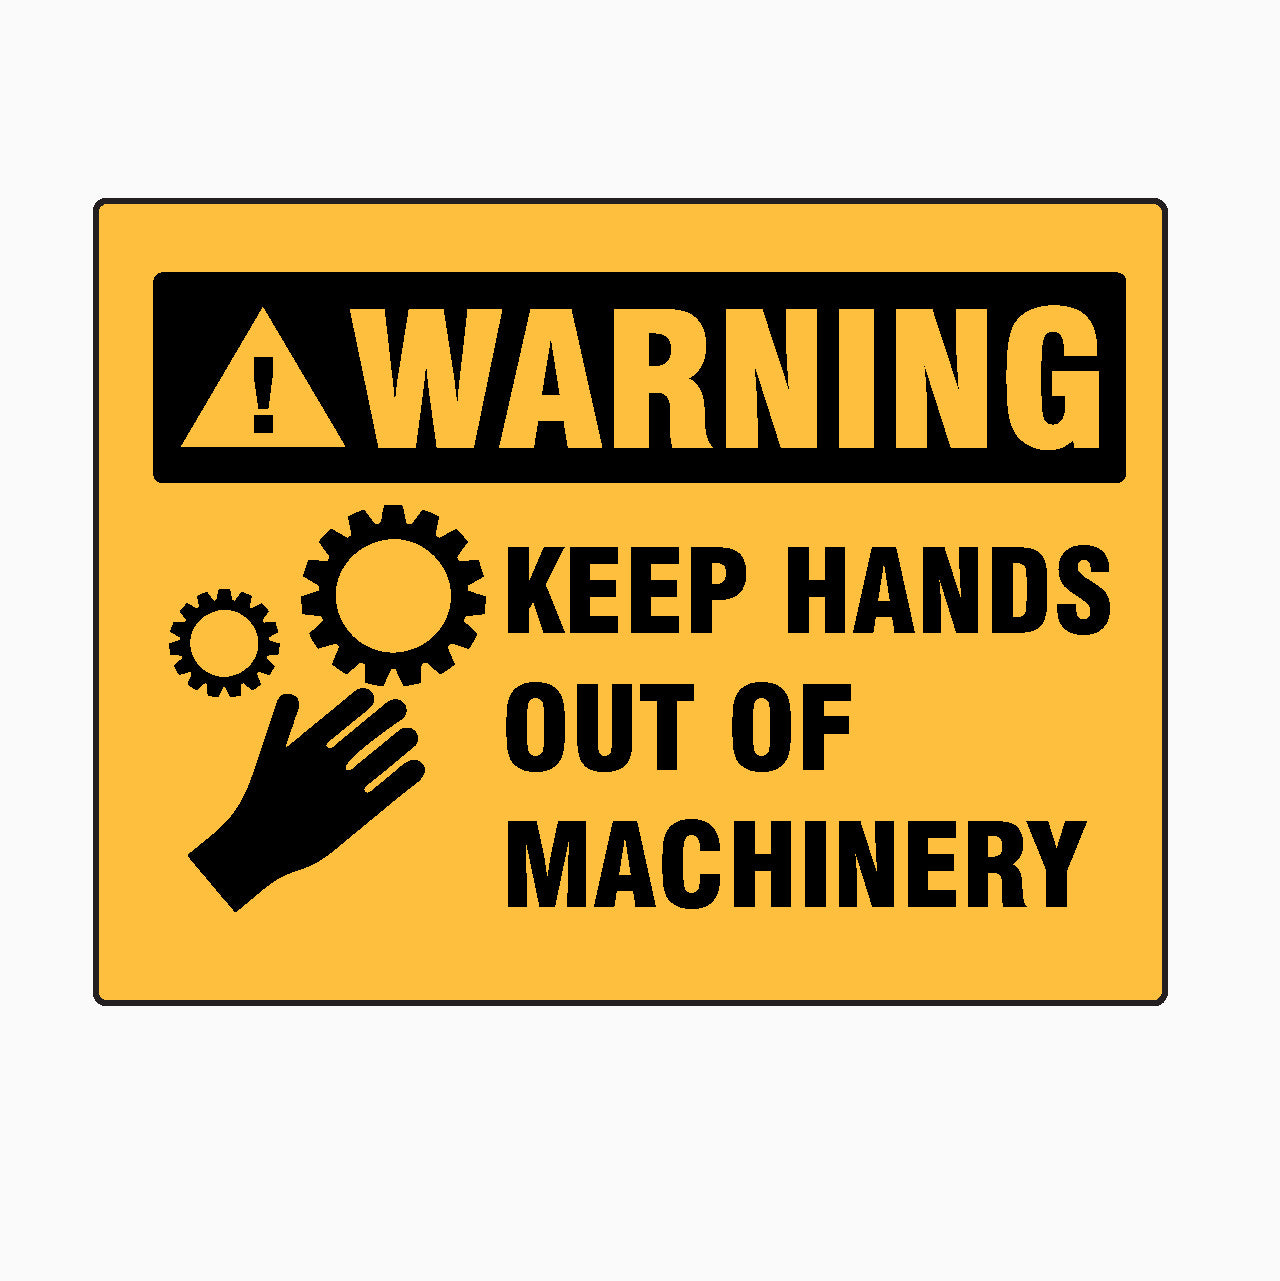 KEEP HANDS OUT OF MACHINERY SIGN - WARNING SIGNS AT GET SIGNS